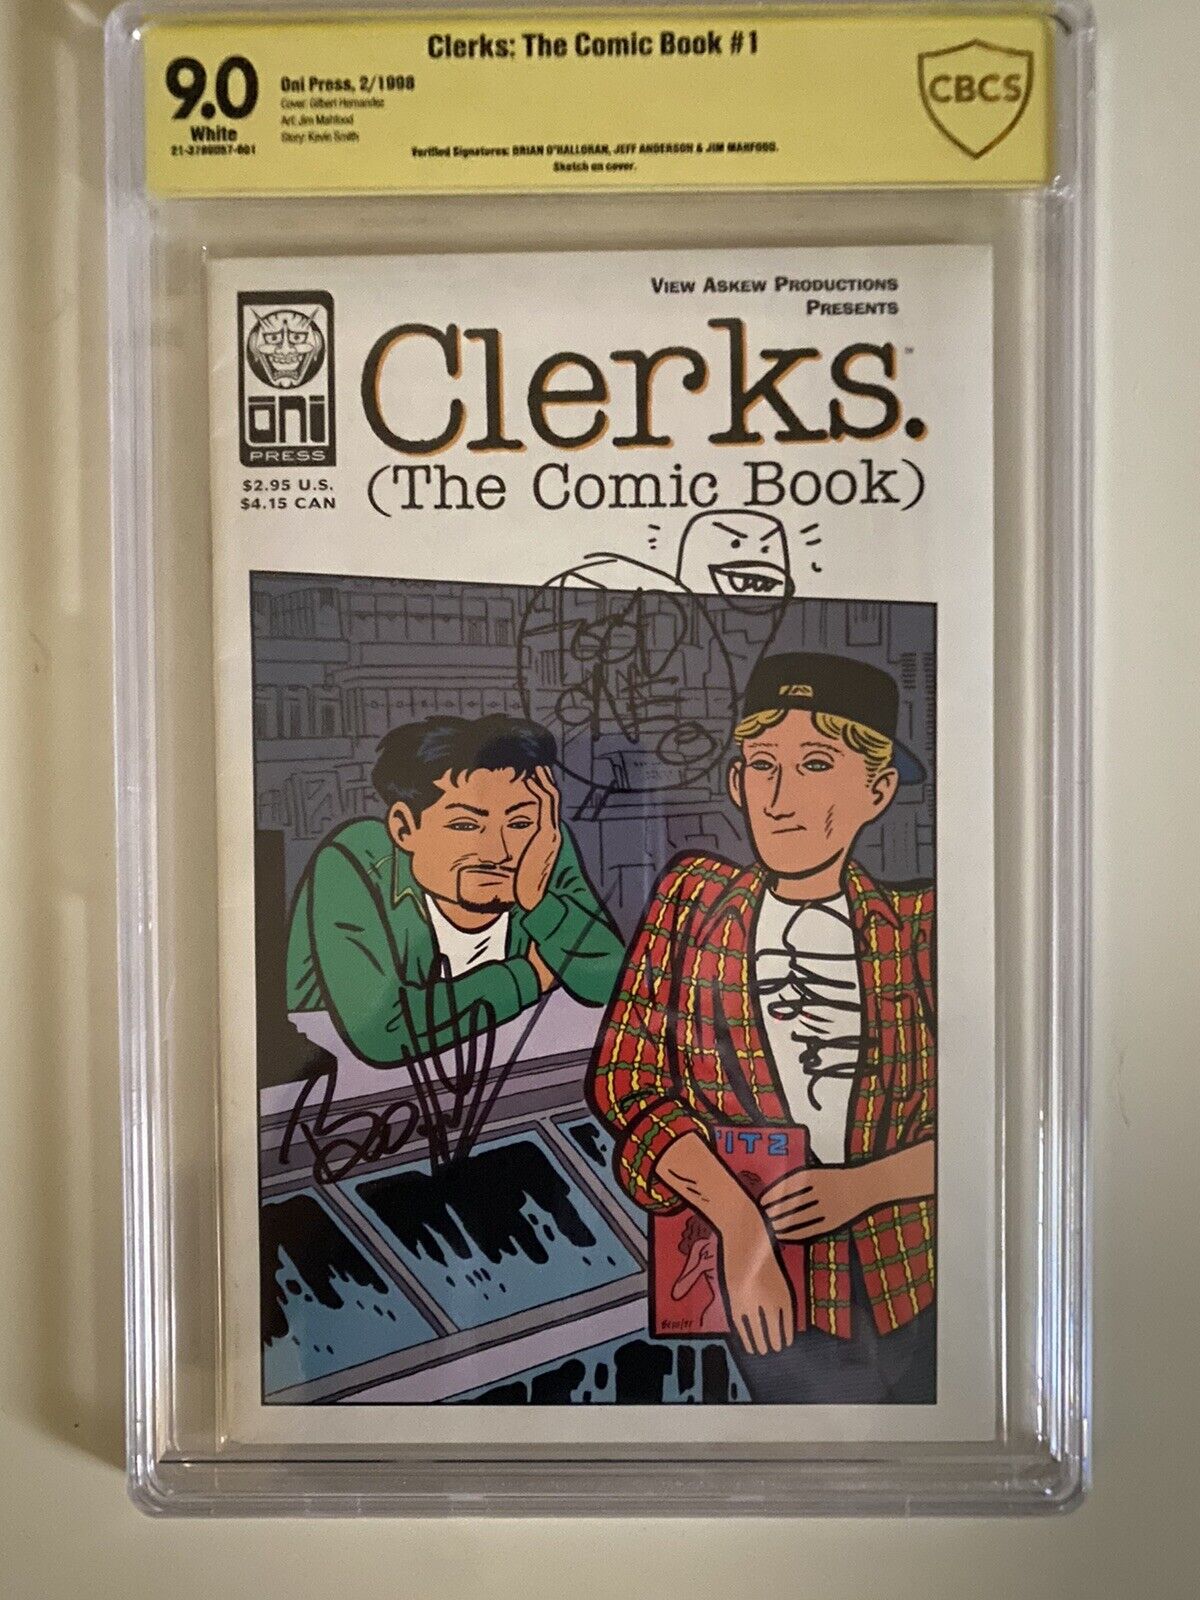 Clerks #1 Signed by Brian O’Halloran, Jeff Anderson, and Jim Mahfood CBCS 9.0